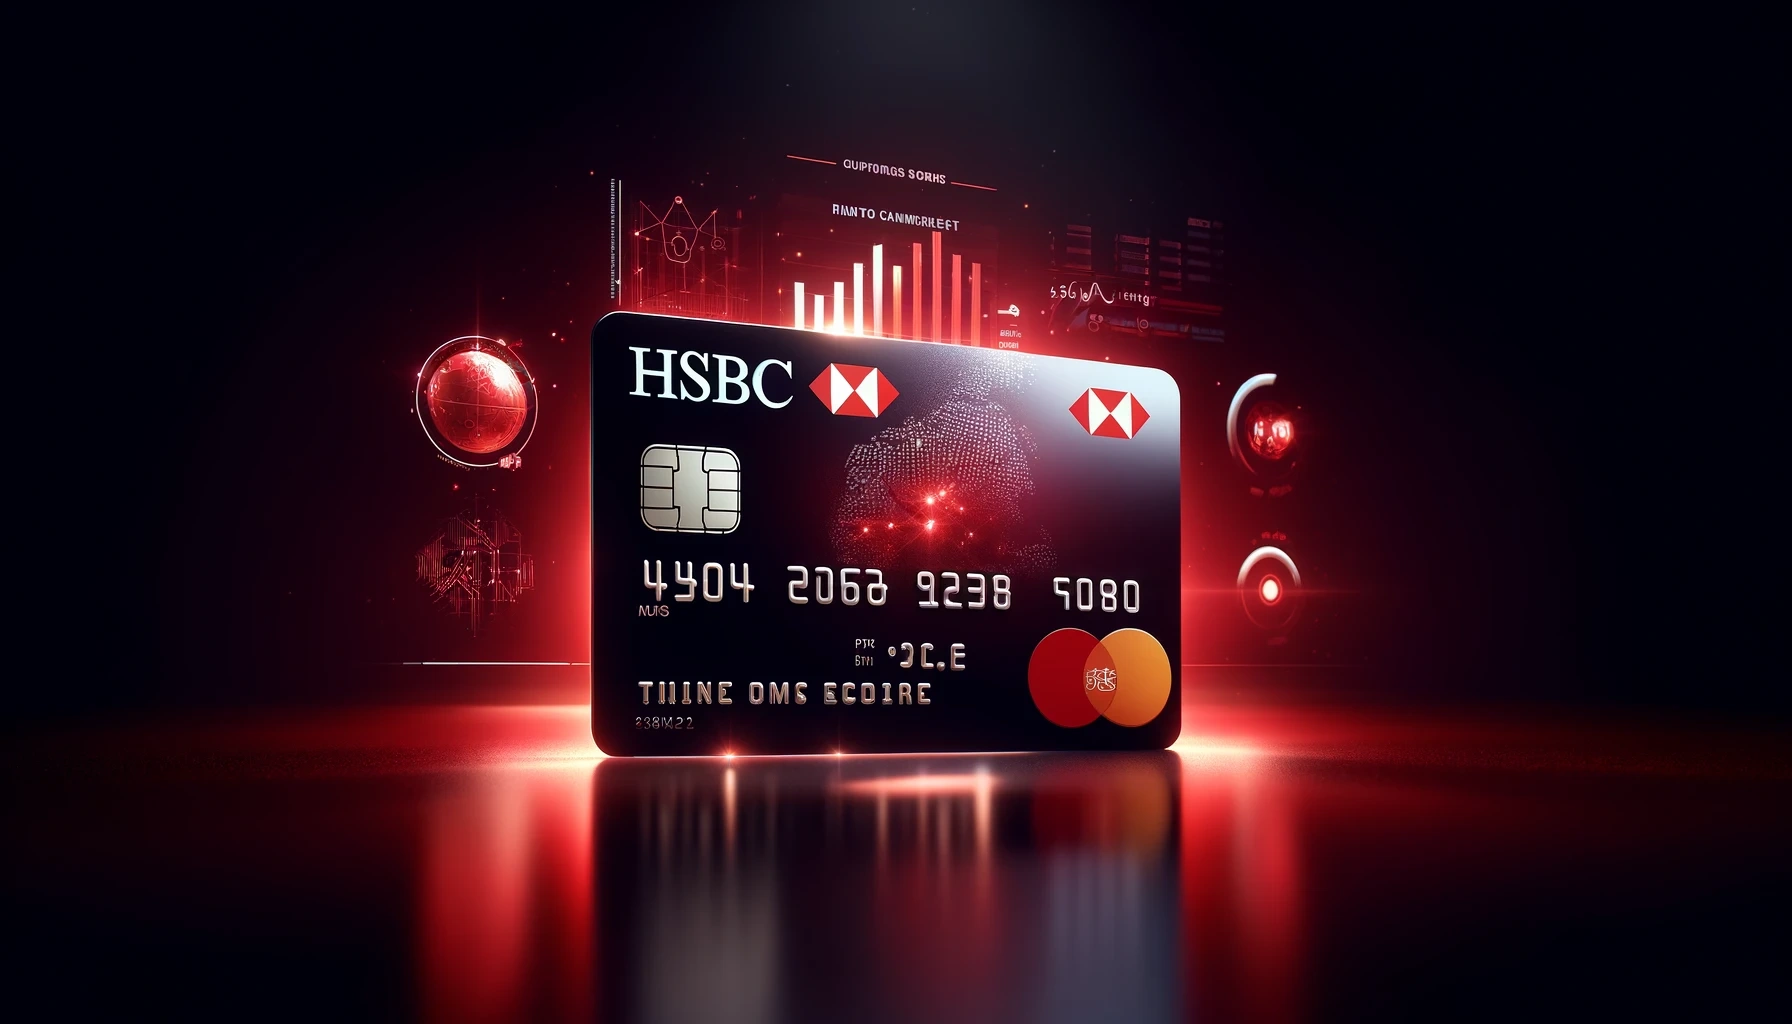 HSBC Credit Card - Learn How to Easily Apply